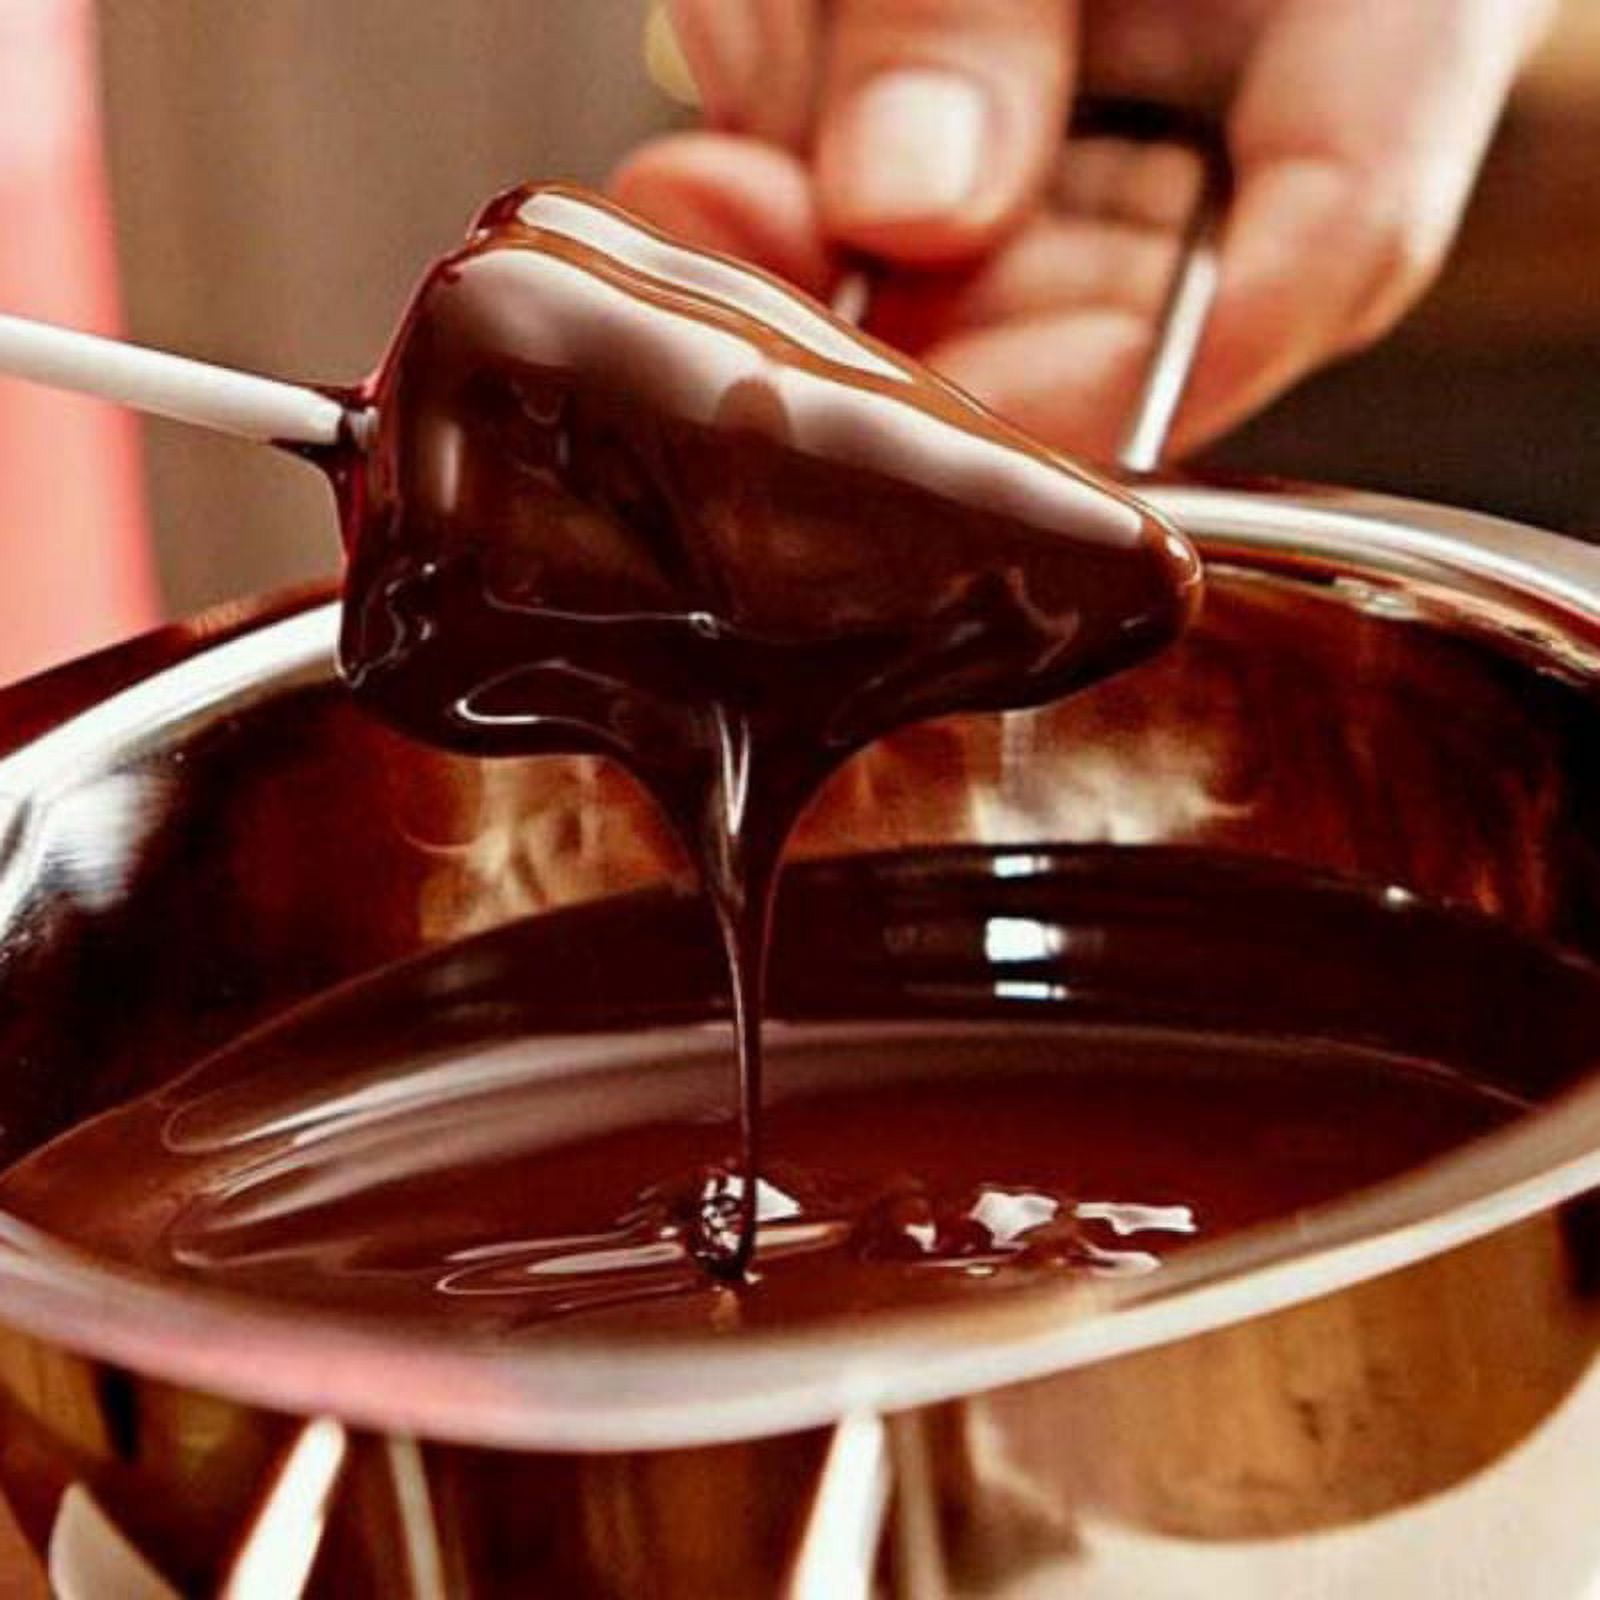 1000ML/1QT Double Boiler Chocolate Melting Pot,304 Stainless Steel Can